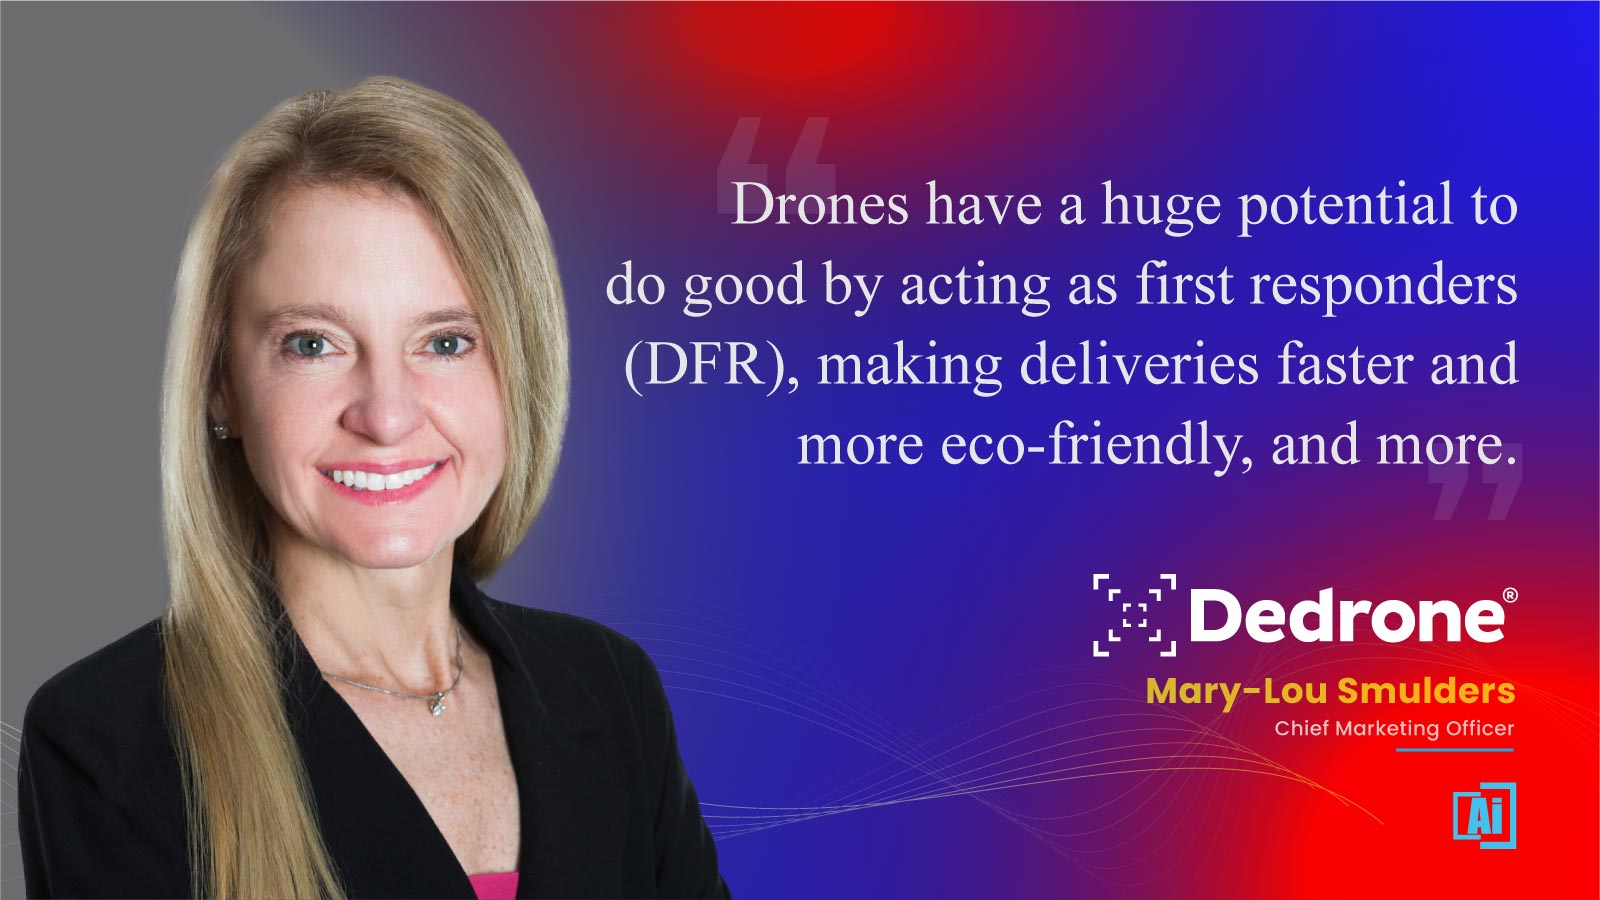 Mary-Lou Smulders, Chief Marketing Officer at Dedrone